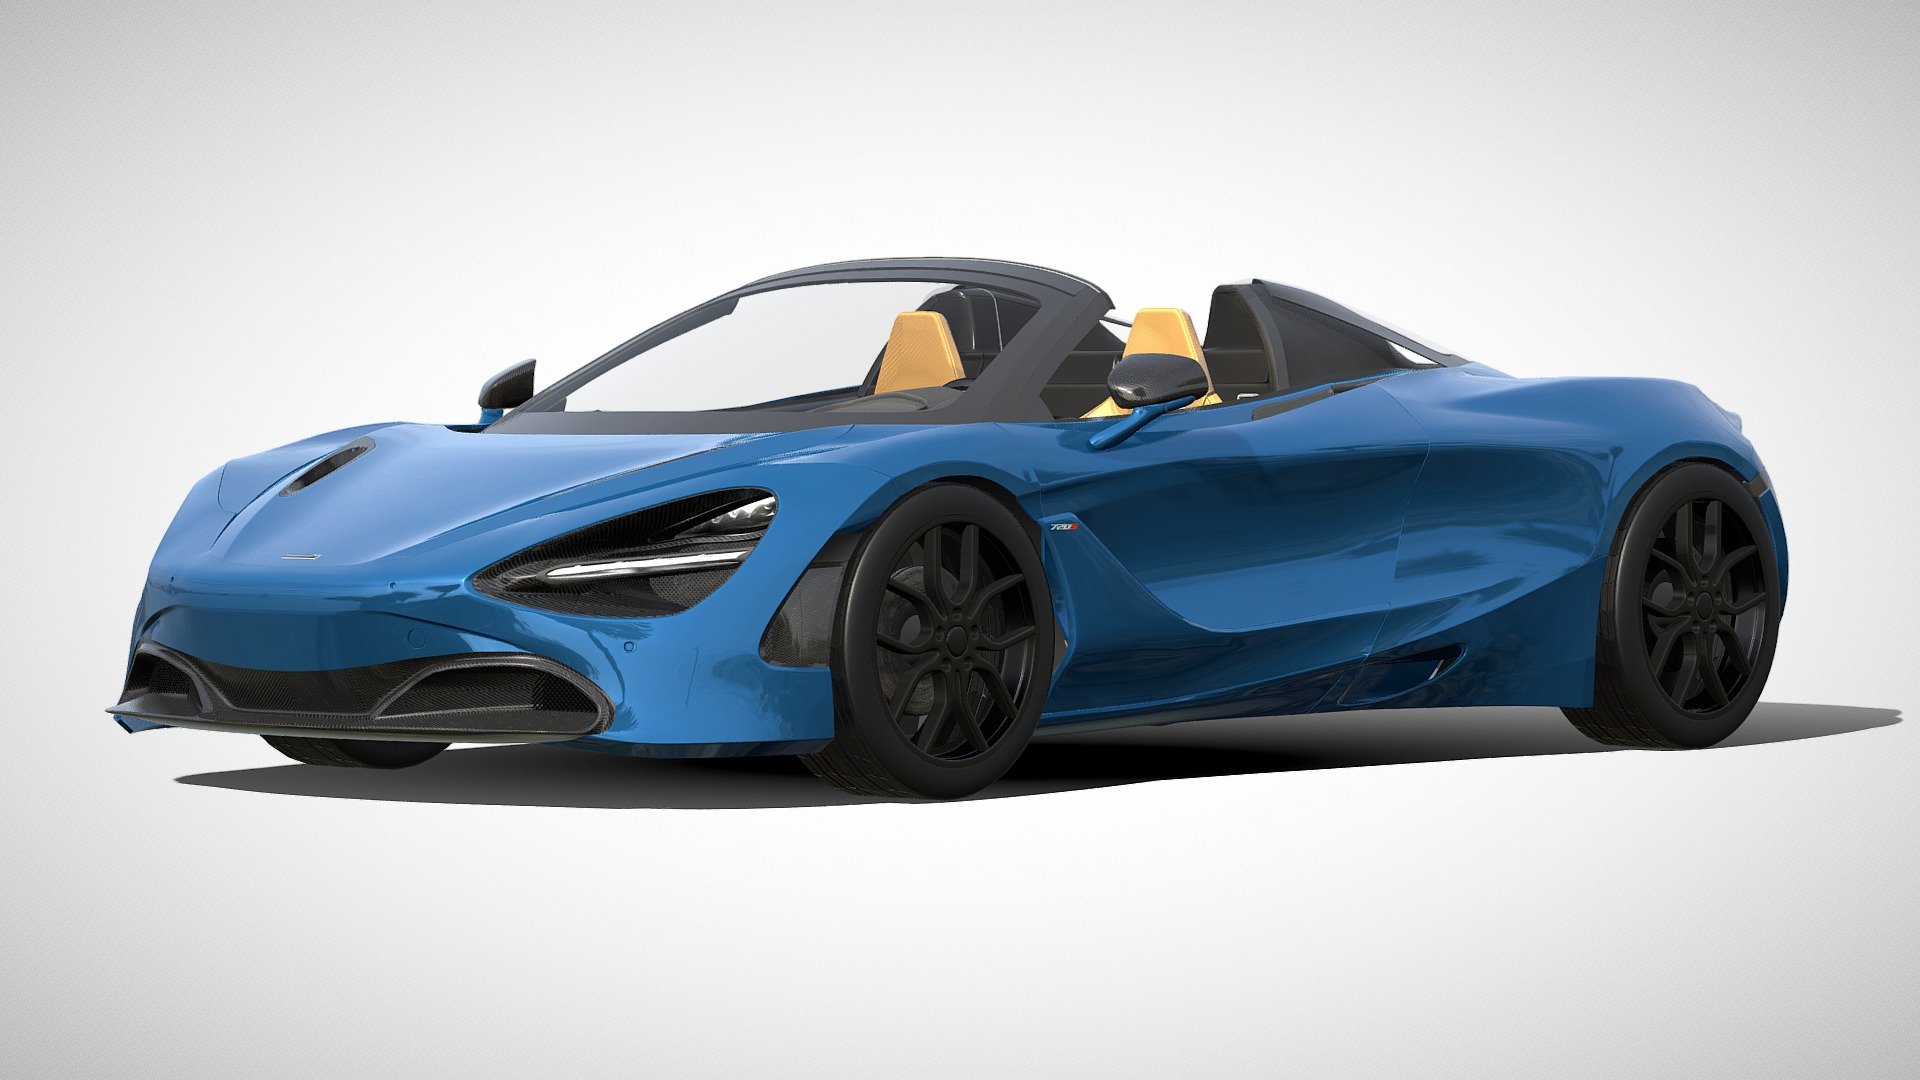 A highly detailed 3D model of the McLaren 720s created by HDM Studios team

Textures:
- All textures were included in this file, but you can also use the glb file - it is in this type of file that textures are attached to the model.

About 3D model:


Highly detailed car model.
Animated model (Blend.file)
PBR textures (Key Shot)
Highly detailed interior of the car
Suitable for use in games

Thank you for purchasing our models! - McLaren 720s - Buy Royalty Free 3D model by HDM Studios (@HDM.Studios) 3d model